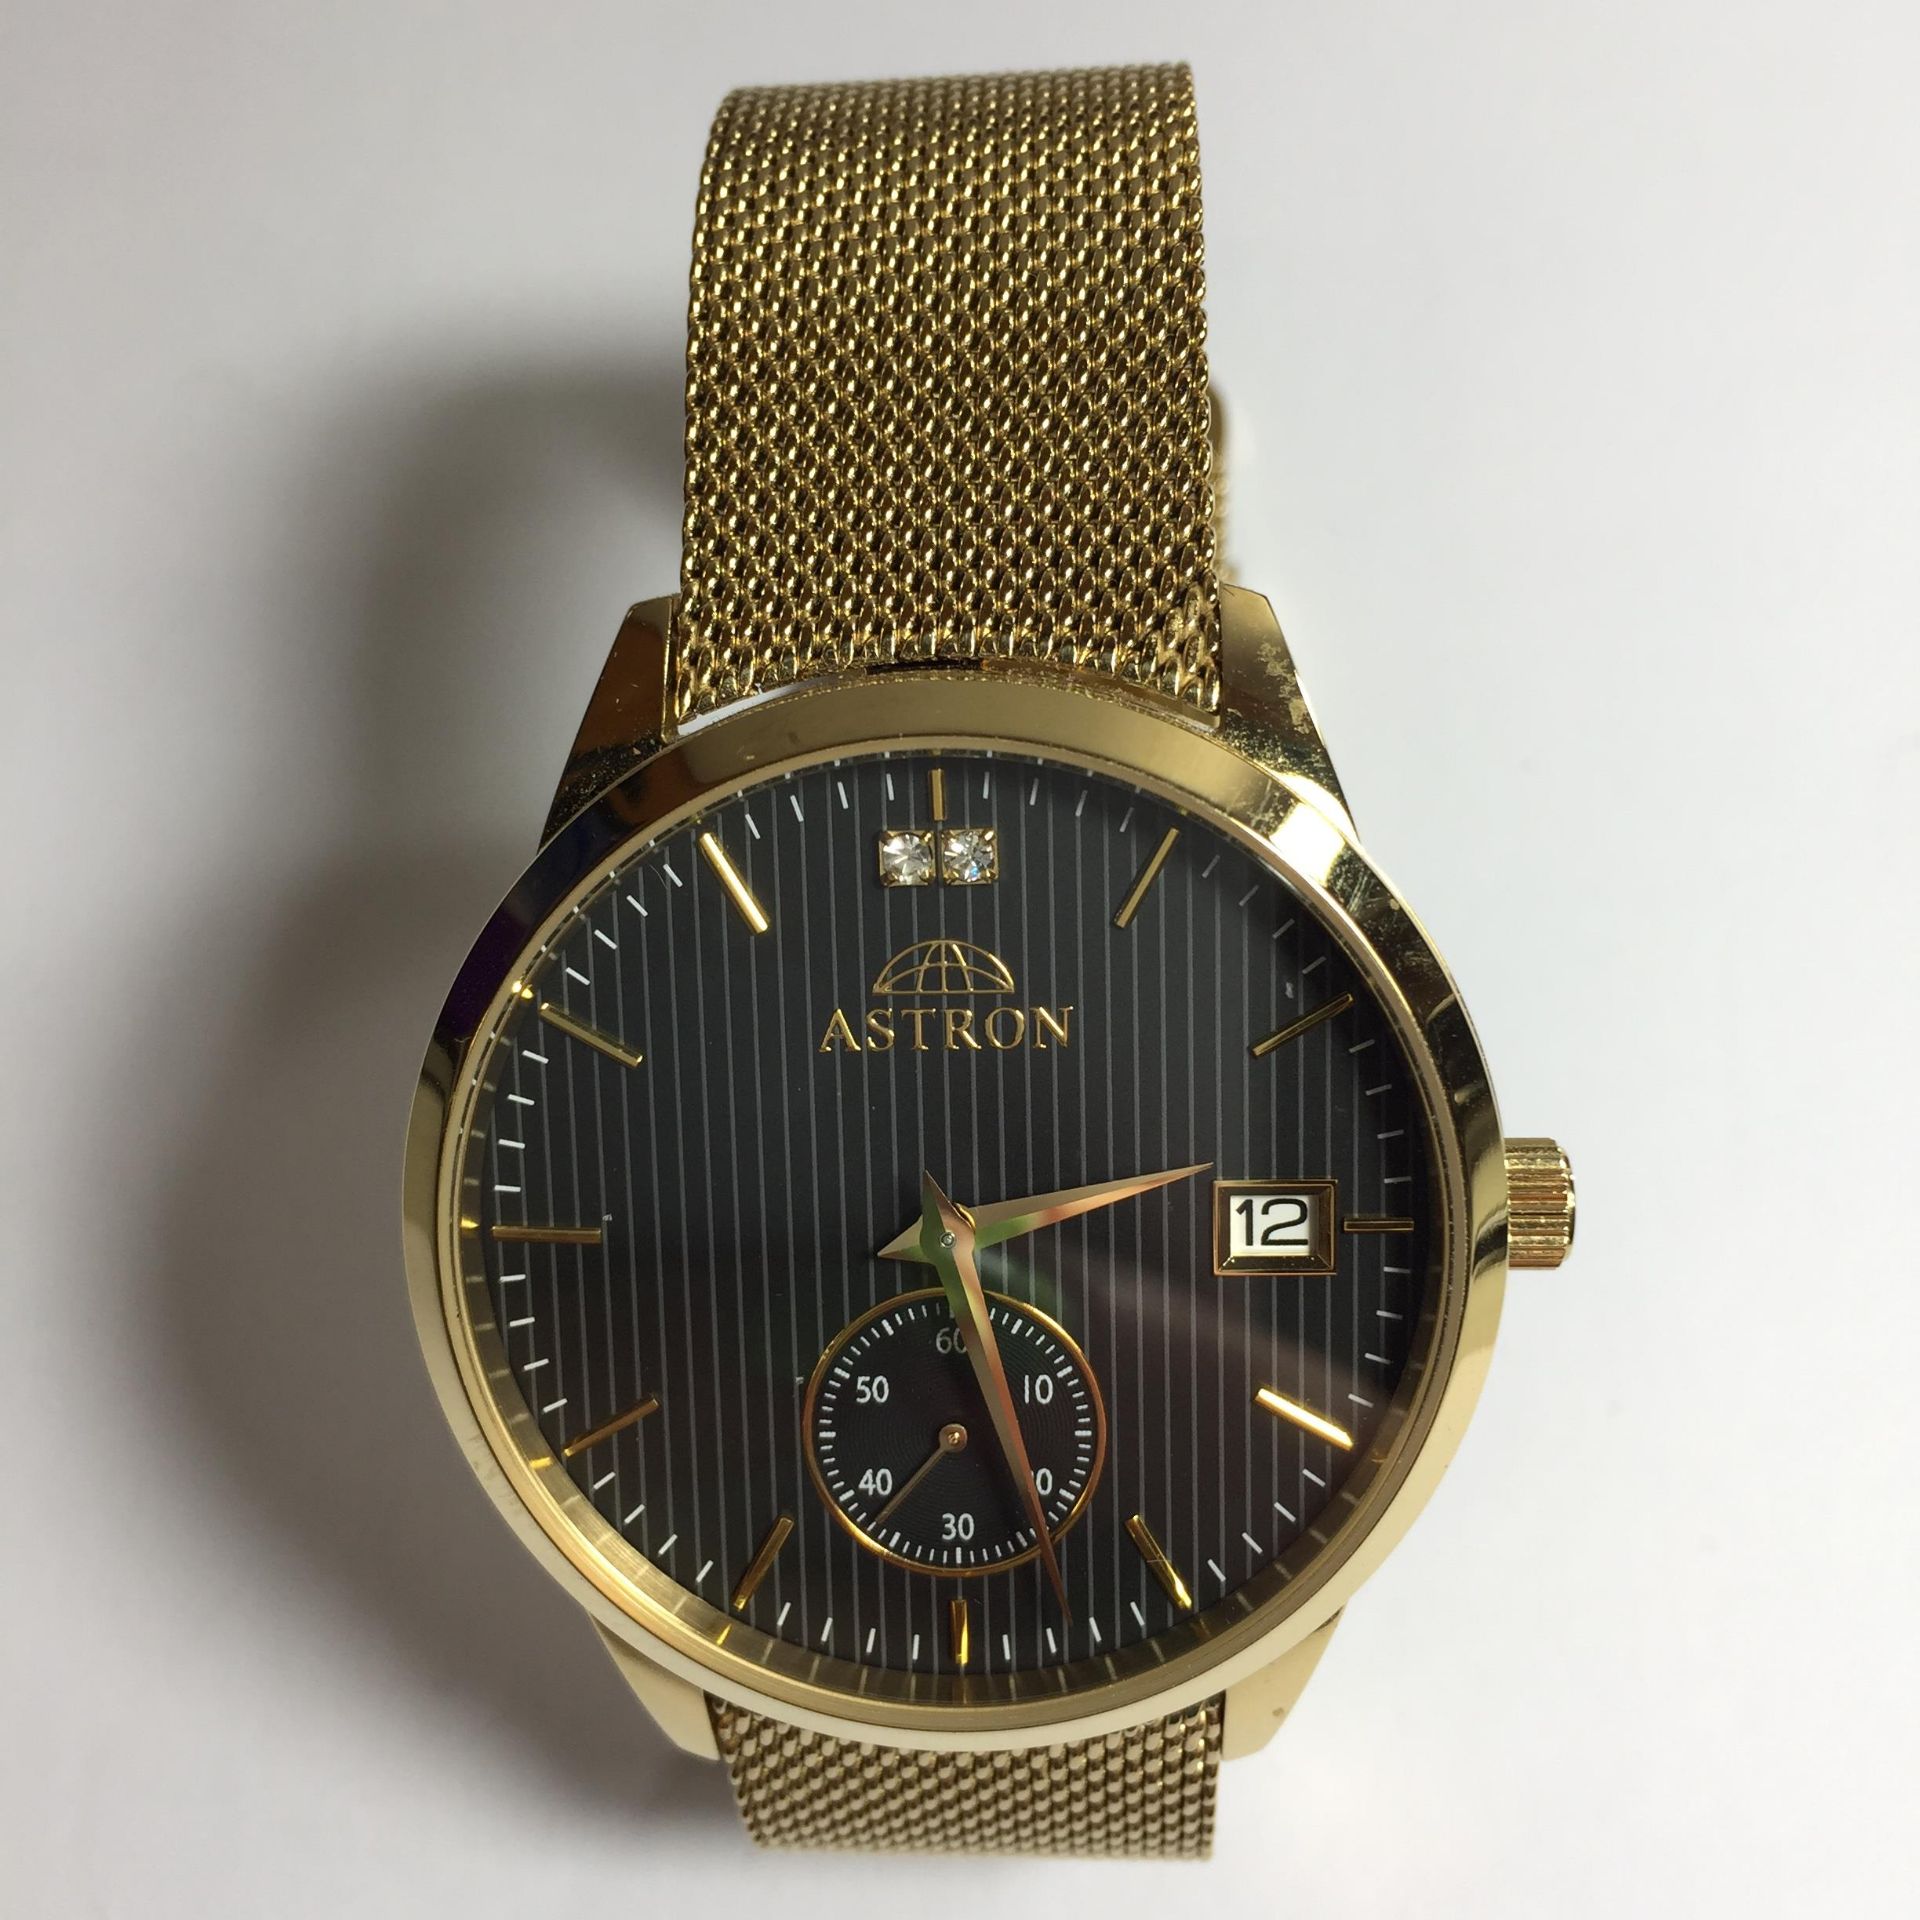 AN ASTRON RONDO GOLD PLATED WATCH WITH CRYSTALS - Image 2 of 3